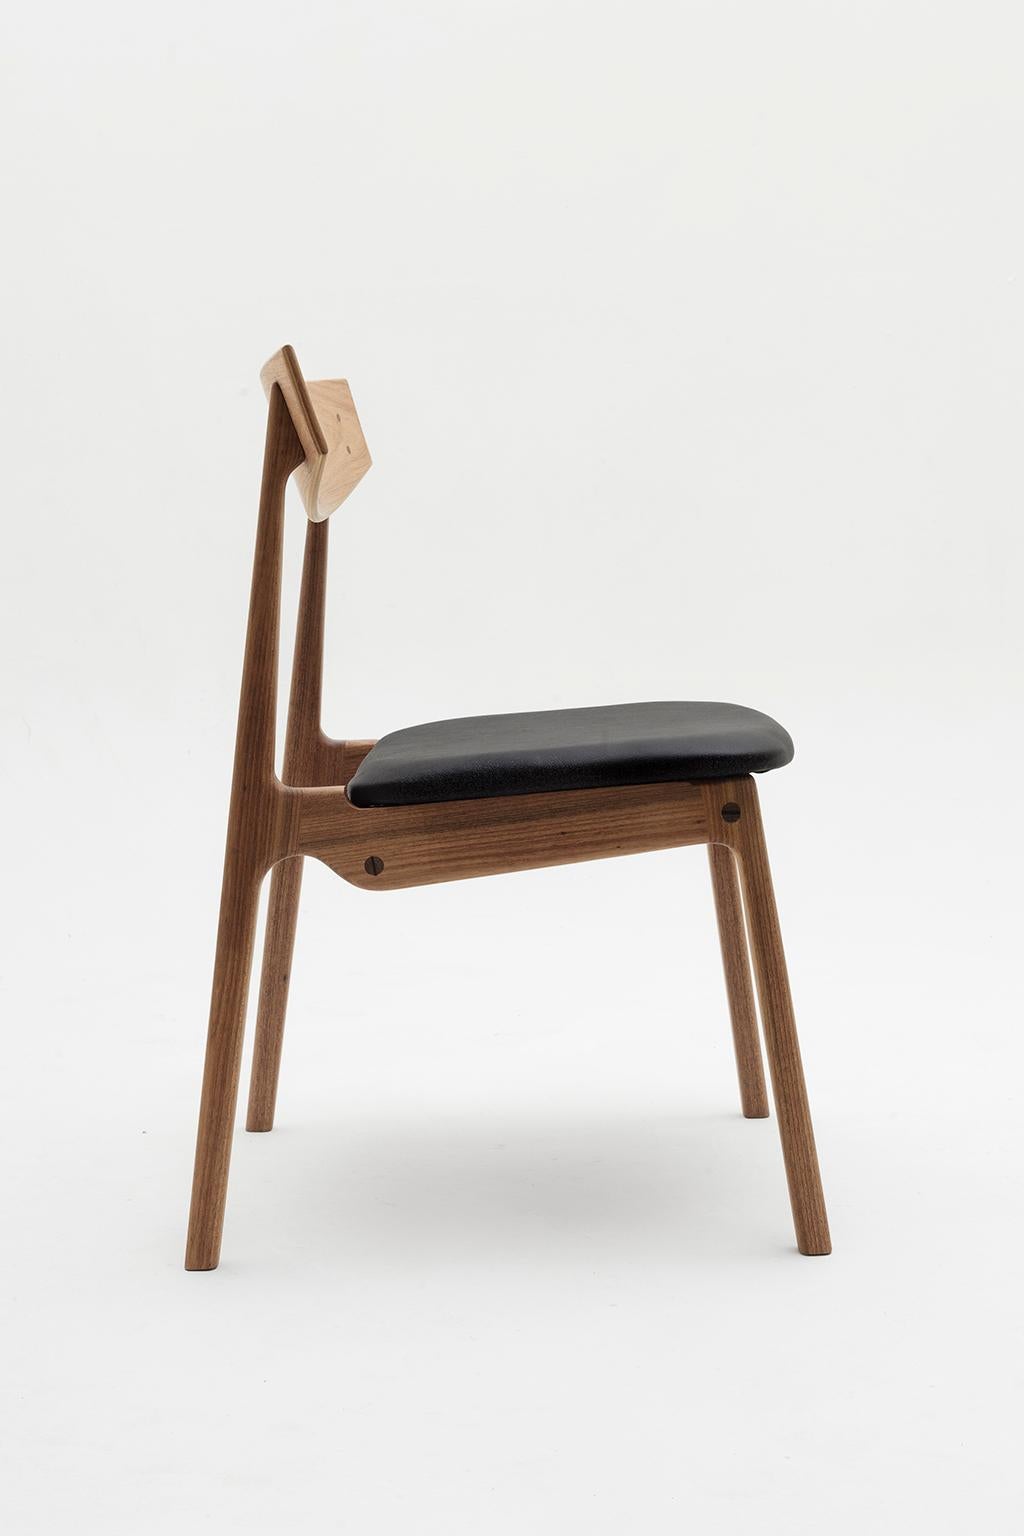 A chair based on Danish modern design mixed with Brazilian tropical woods.